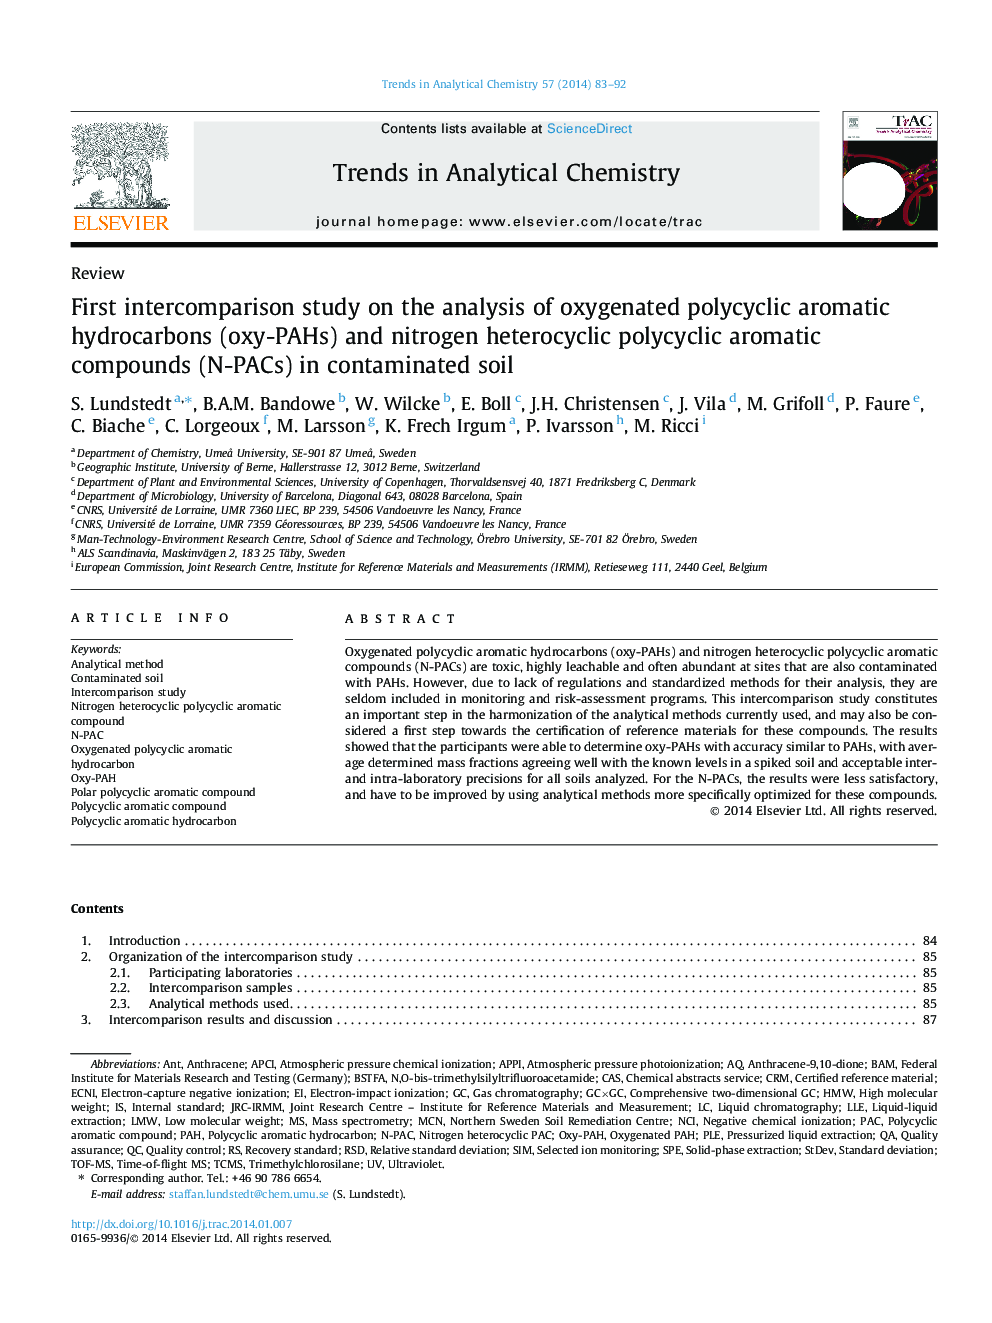 First intercomparison study on the analysis of oxygenated polycyclic aromatic hydrocarbons (oxy-PAHs) and nitrogen heterocyclic polycyclic aromatic compounds (N-PACs) in contaminated soil